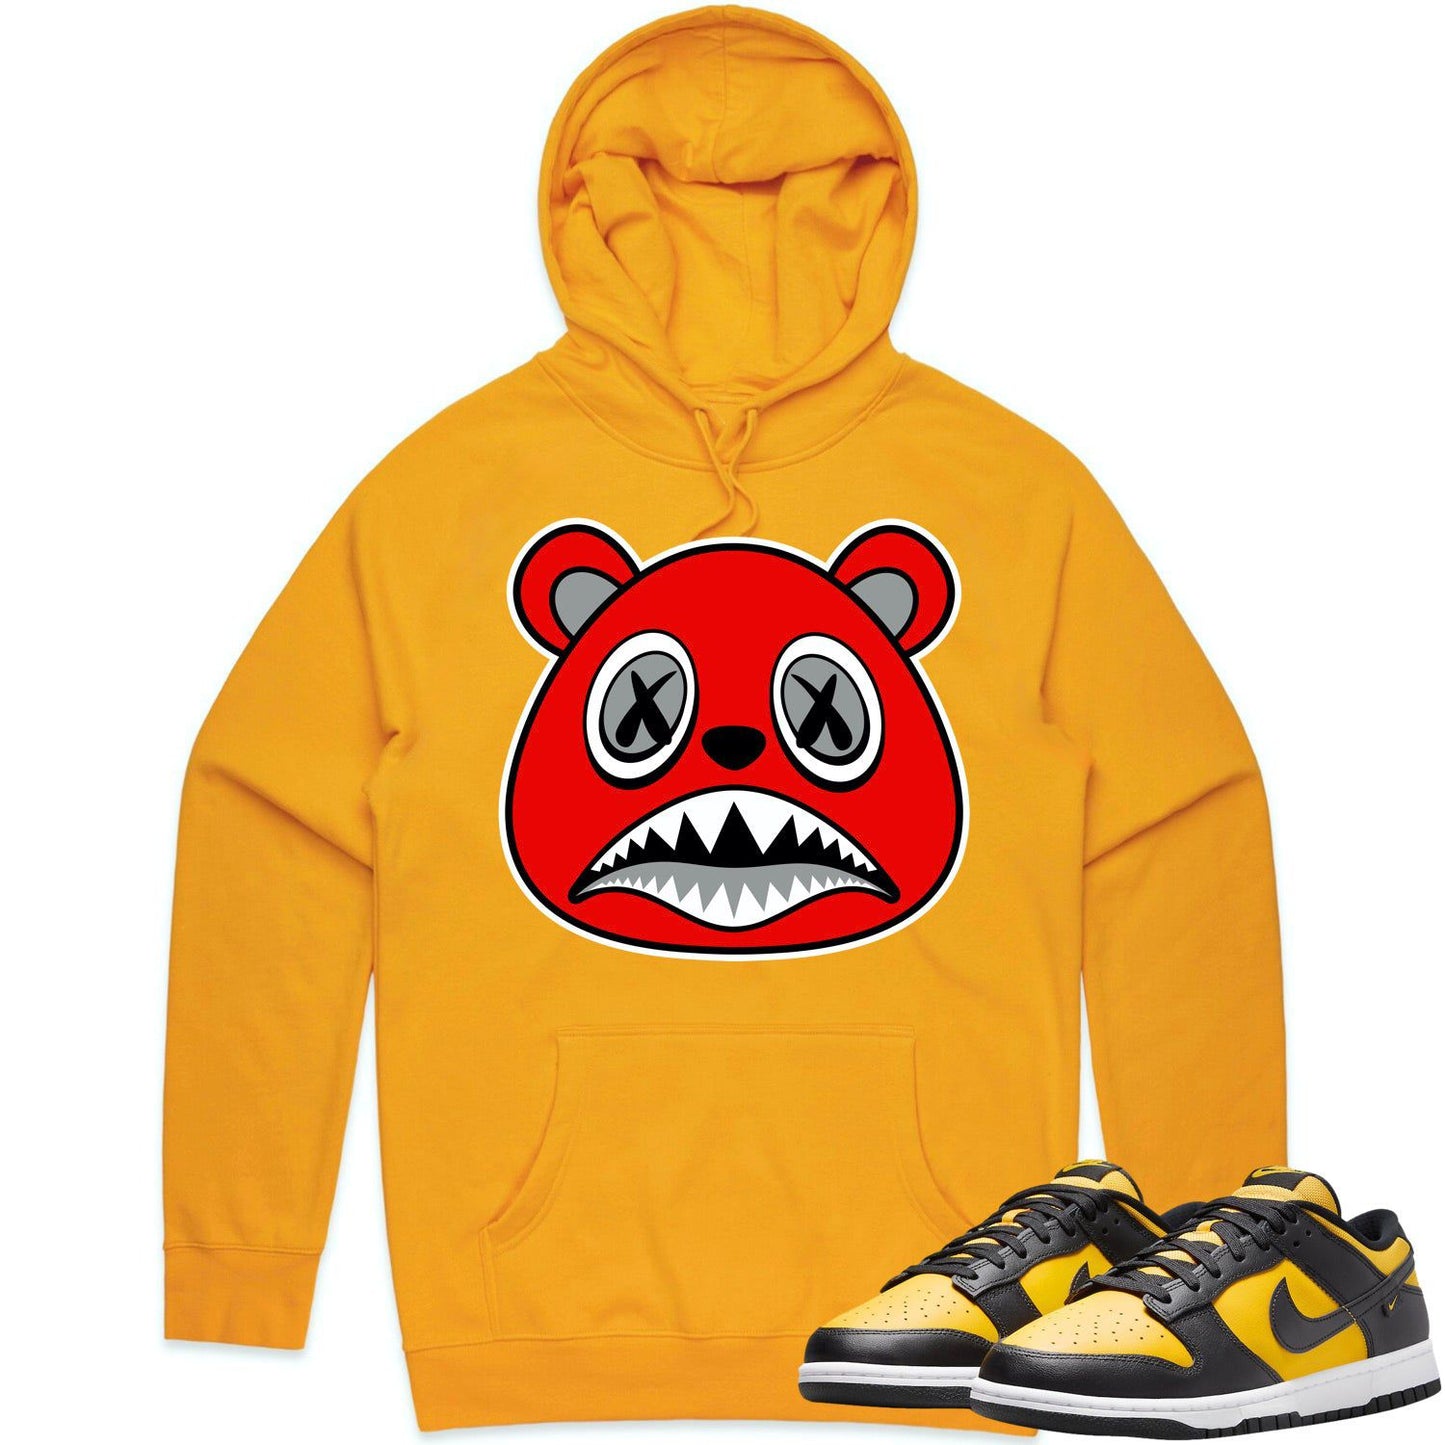 Black University Gold Dunks Hoodie - Dunks Hoodies - Angry Baws